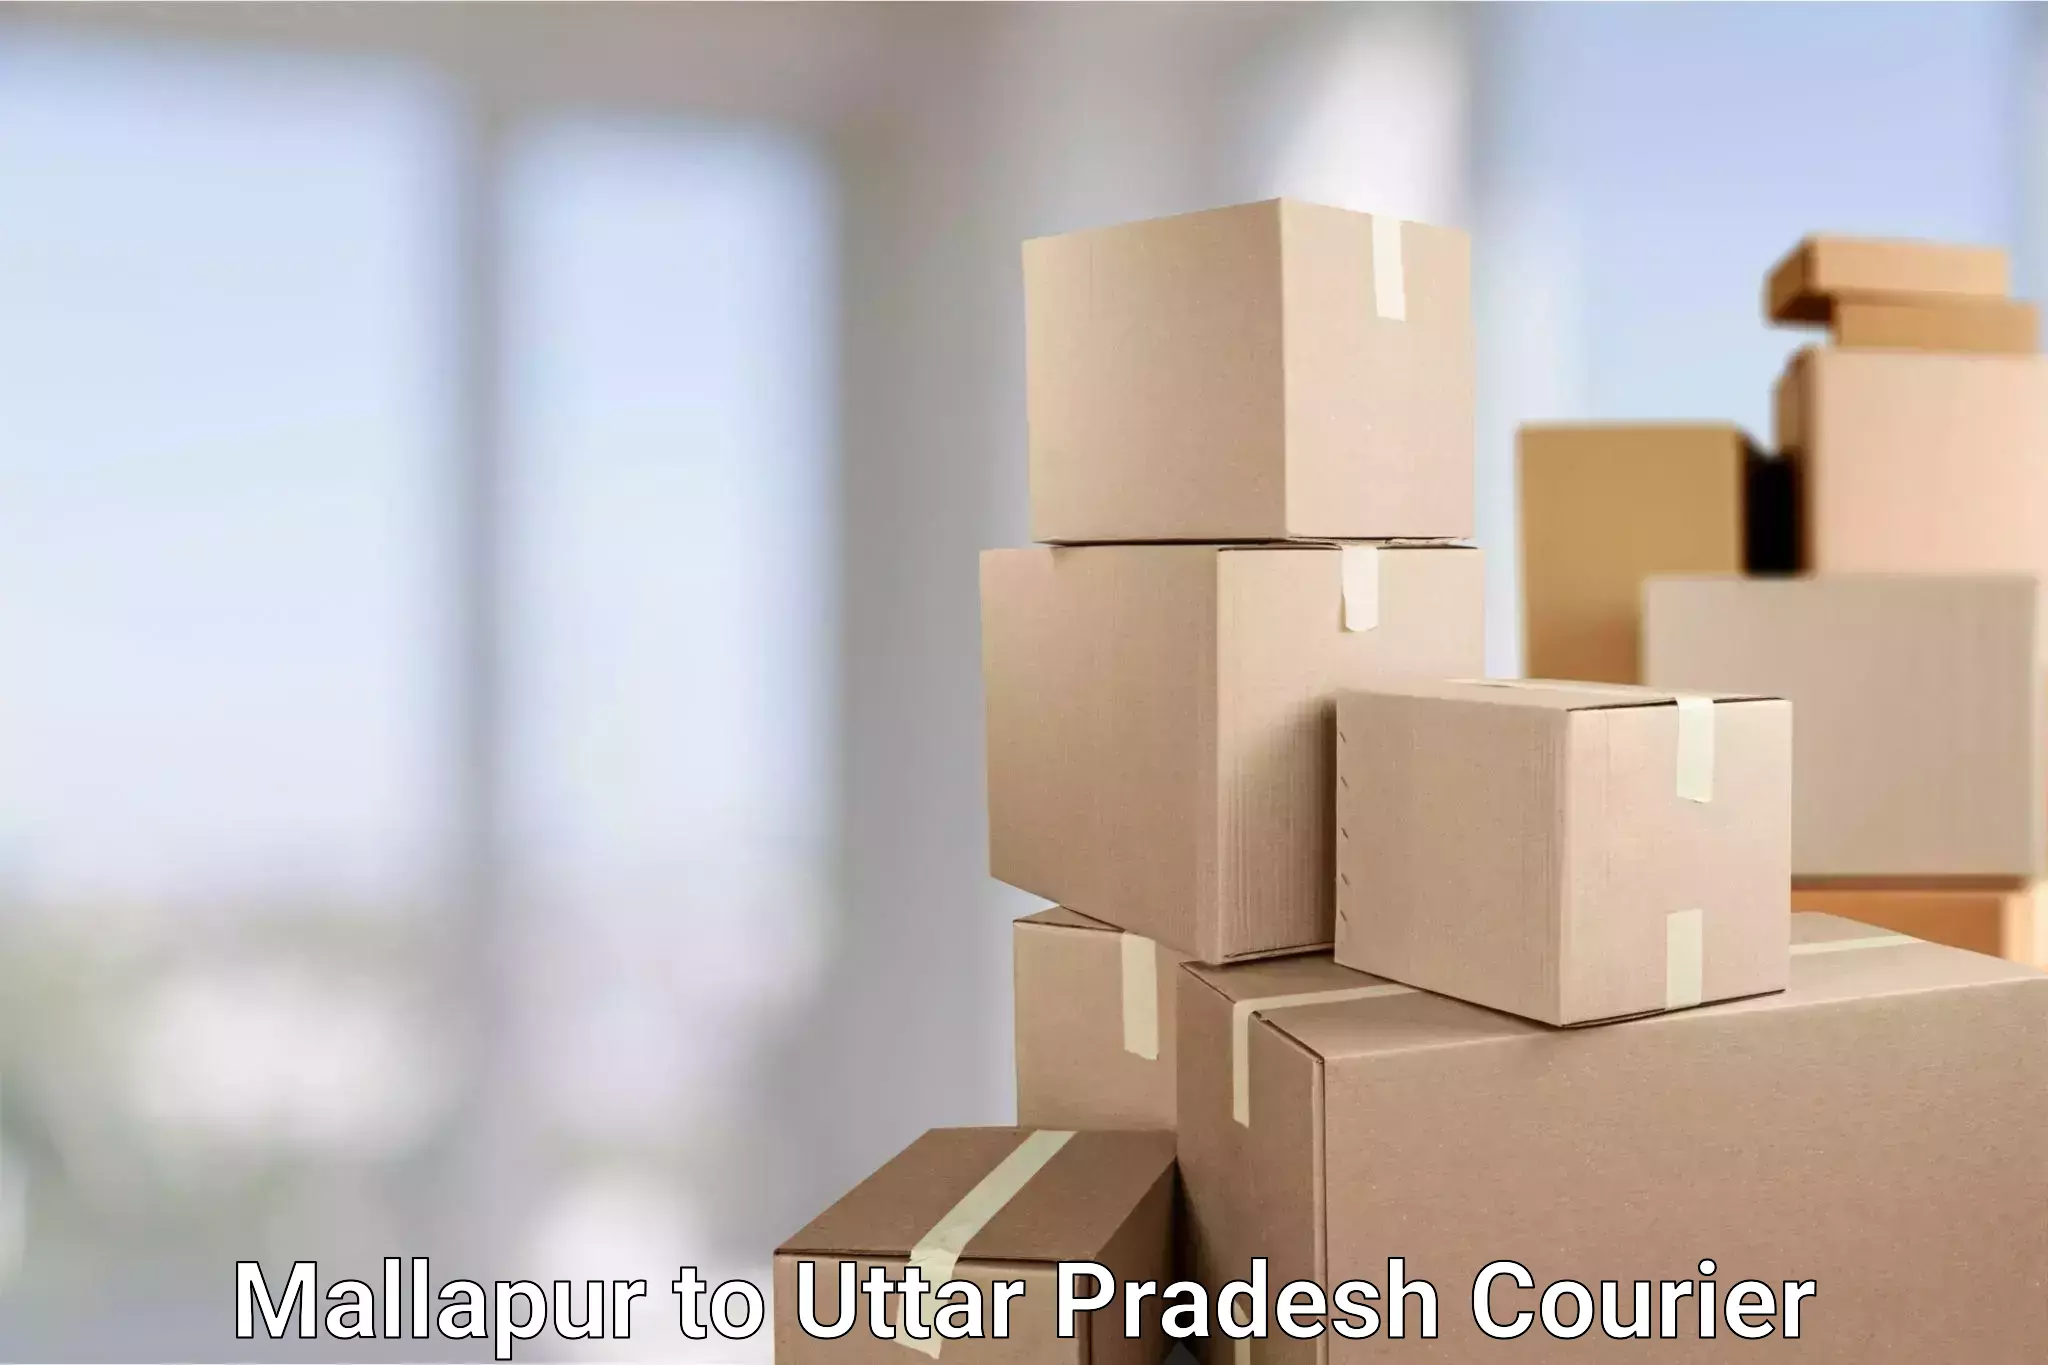 Courier service efficiency Mallapur to Anpara